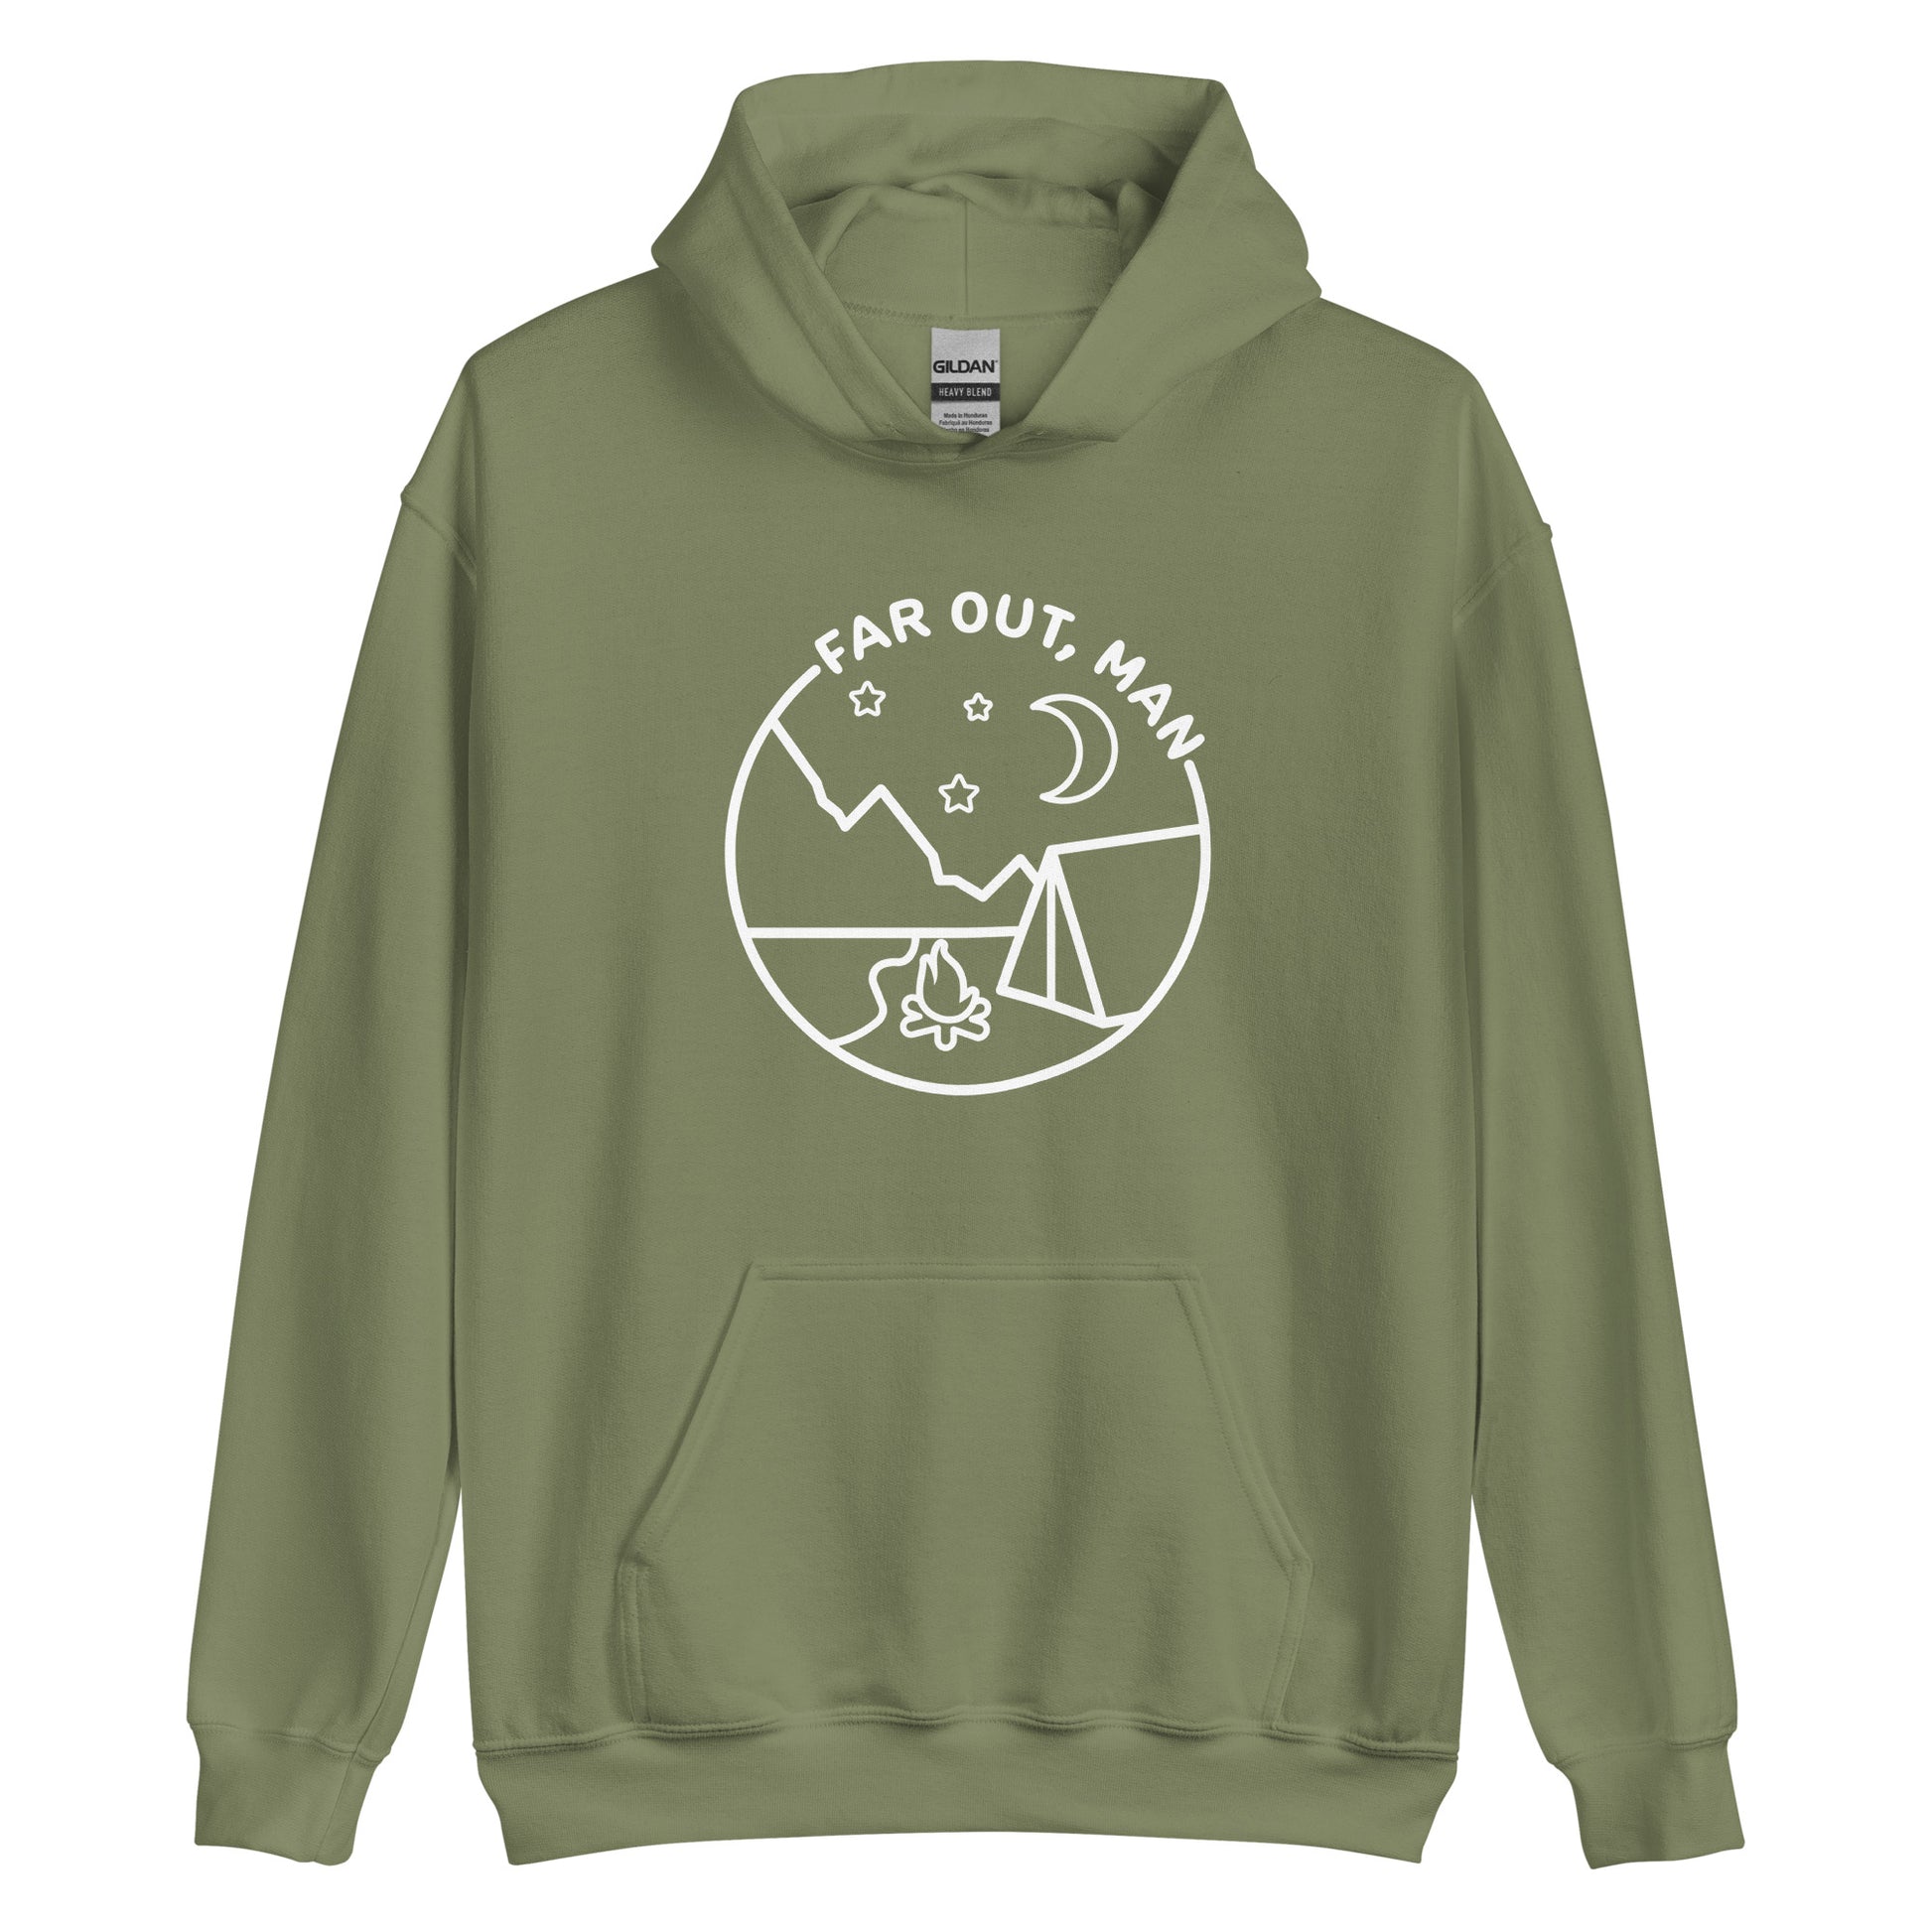 An olive green hooded sweatshirt featuring a white lineart illustration of a campfire and tent under a night sky. Text in an arc above the illustration reads "Far out, man".